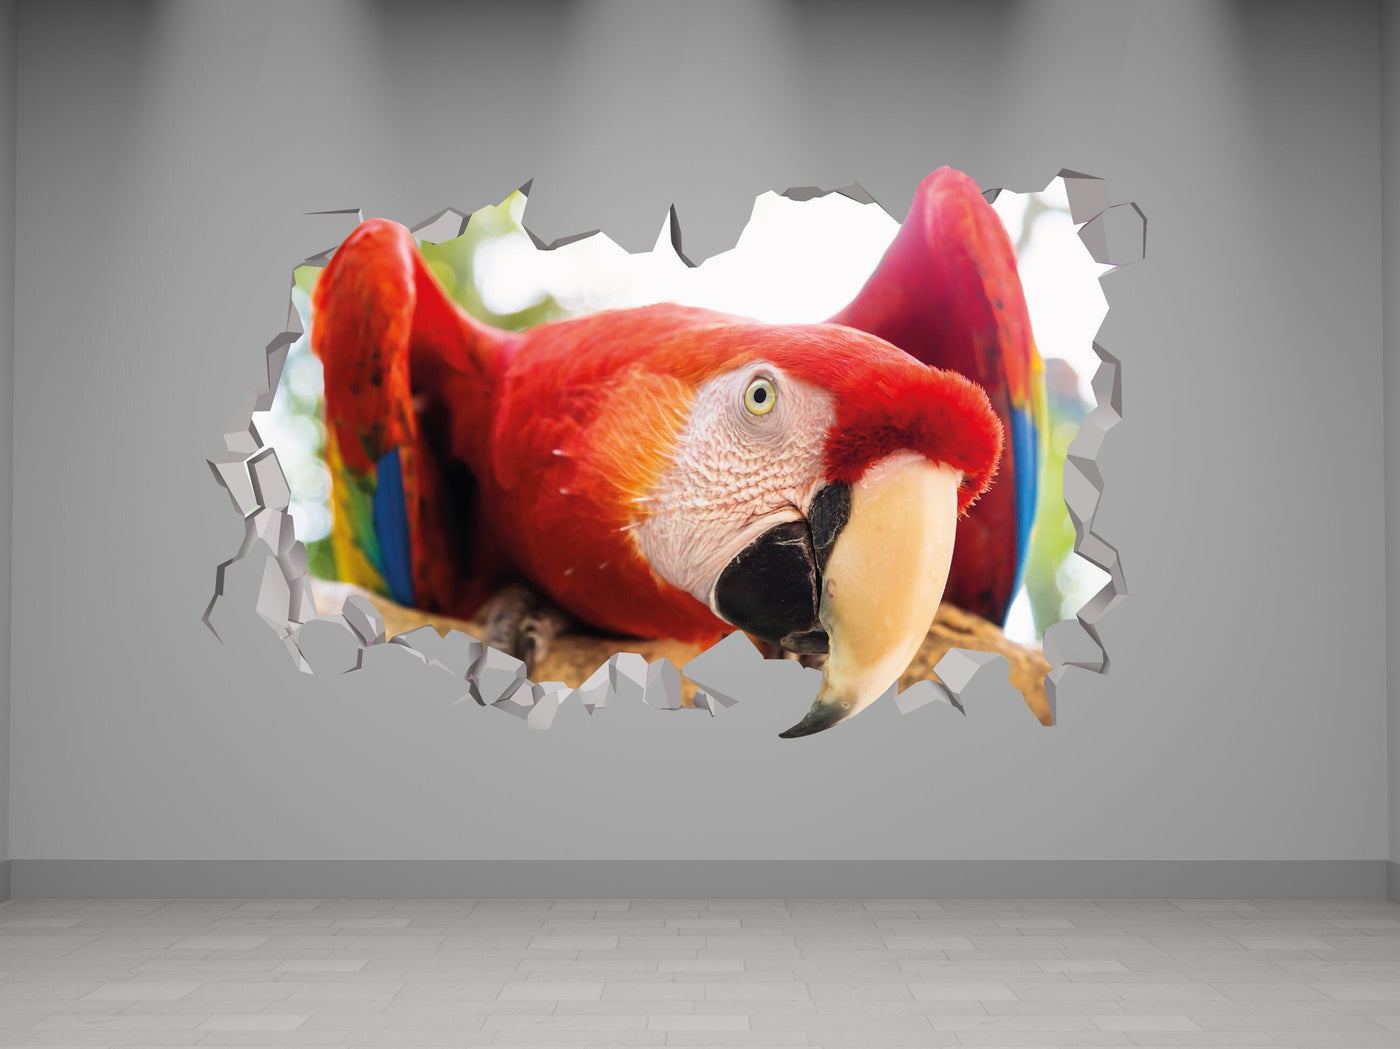 Macaw Wall Decal - Macaw Sticker - Macaw Red and Yellow - Macaw Scarlet Charm - Macaw Ornament - Macaw 3d Art Decor - Macaw Animal Tropical